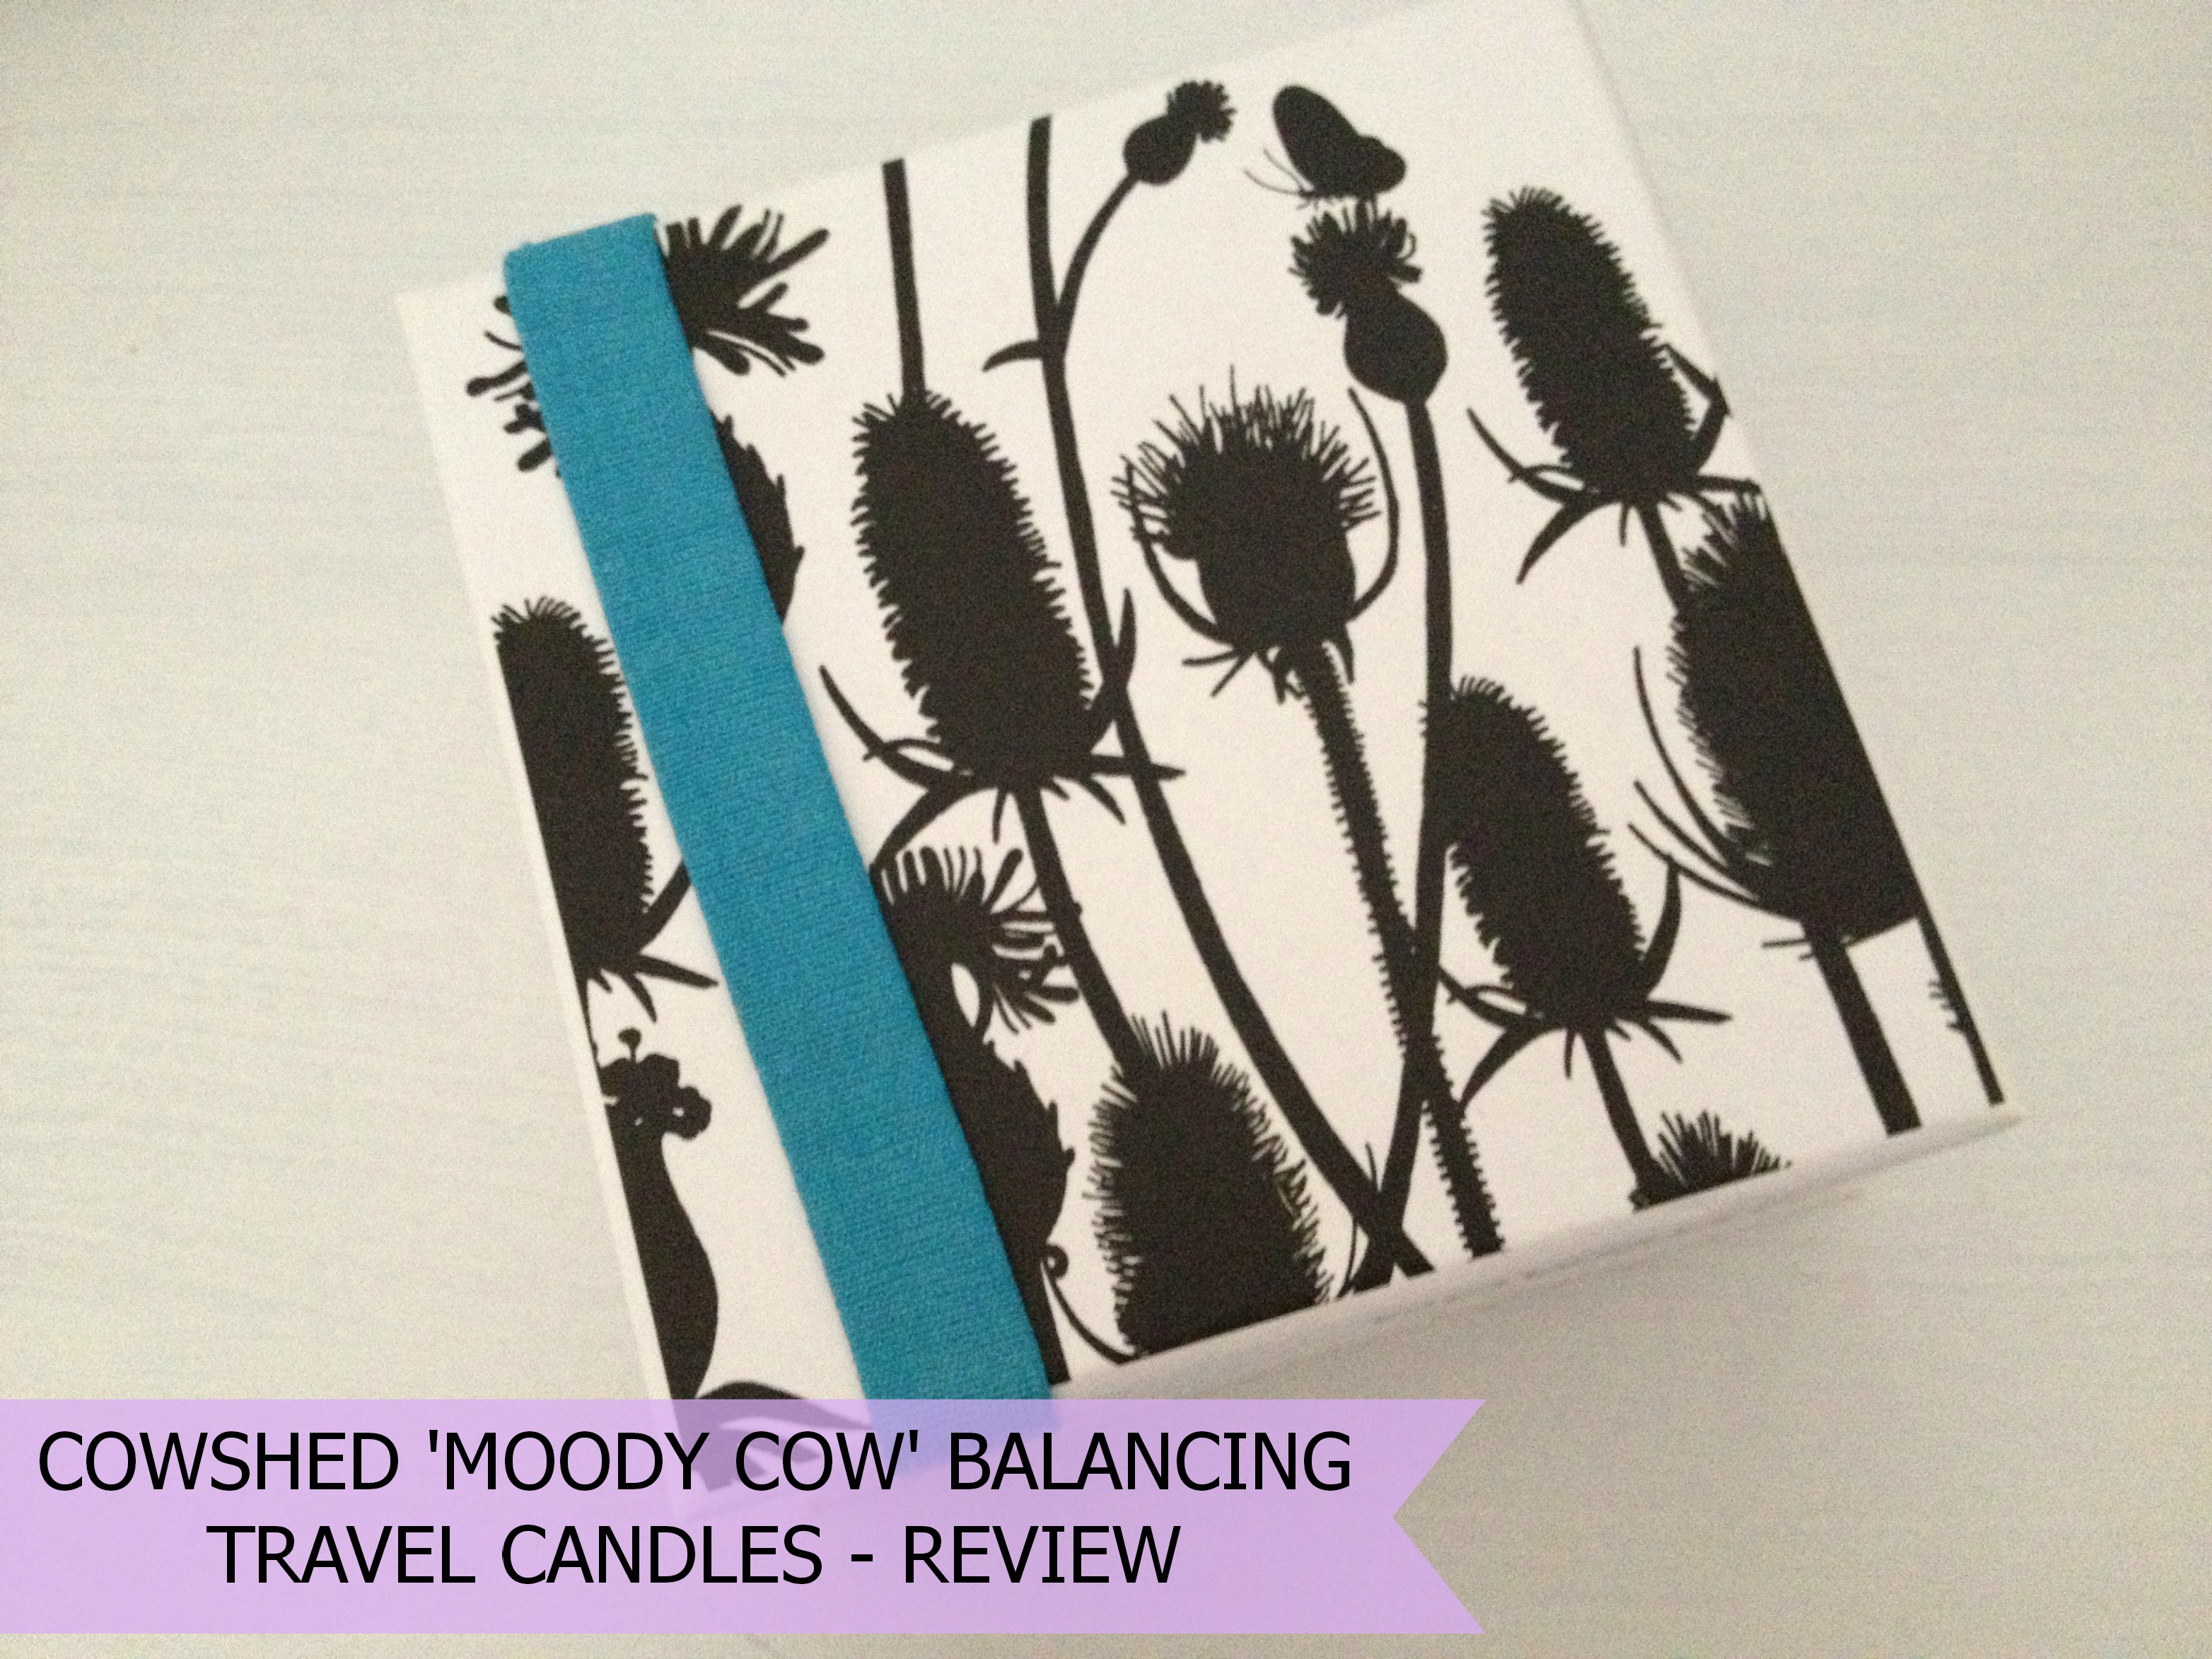 Cowshed_Moody_Cow_Balancing_Travel_Candles_1